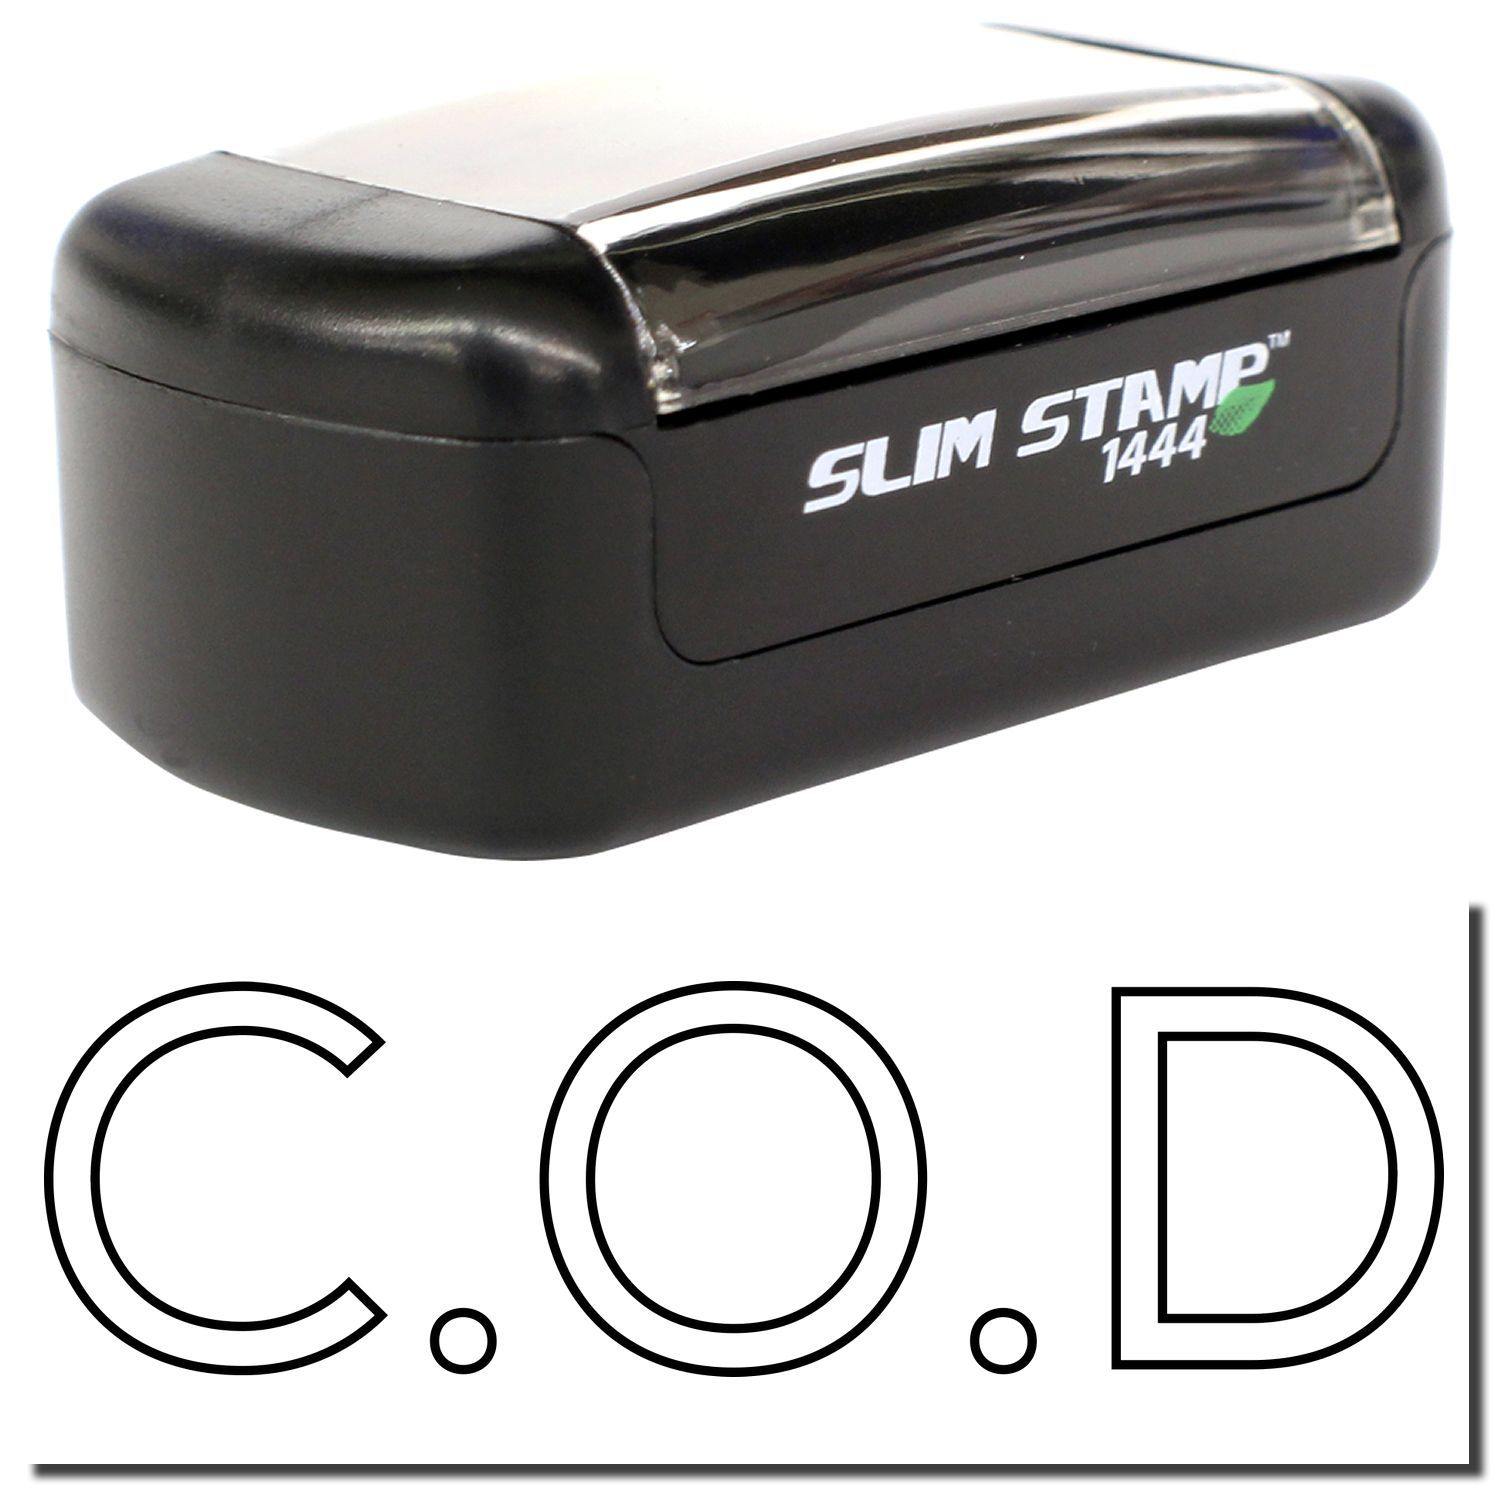 A stock office pre-inked stamp with a stamped image showing how the text "C.O.D" in an outline style is displayed after stamping.